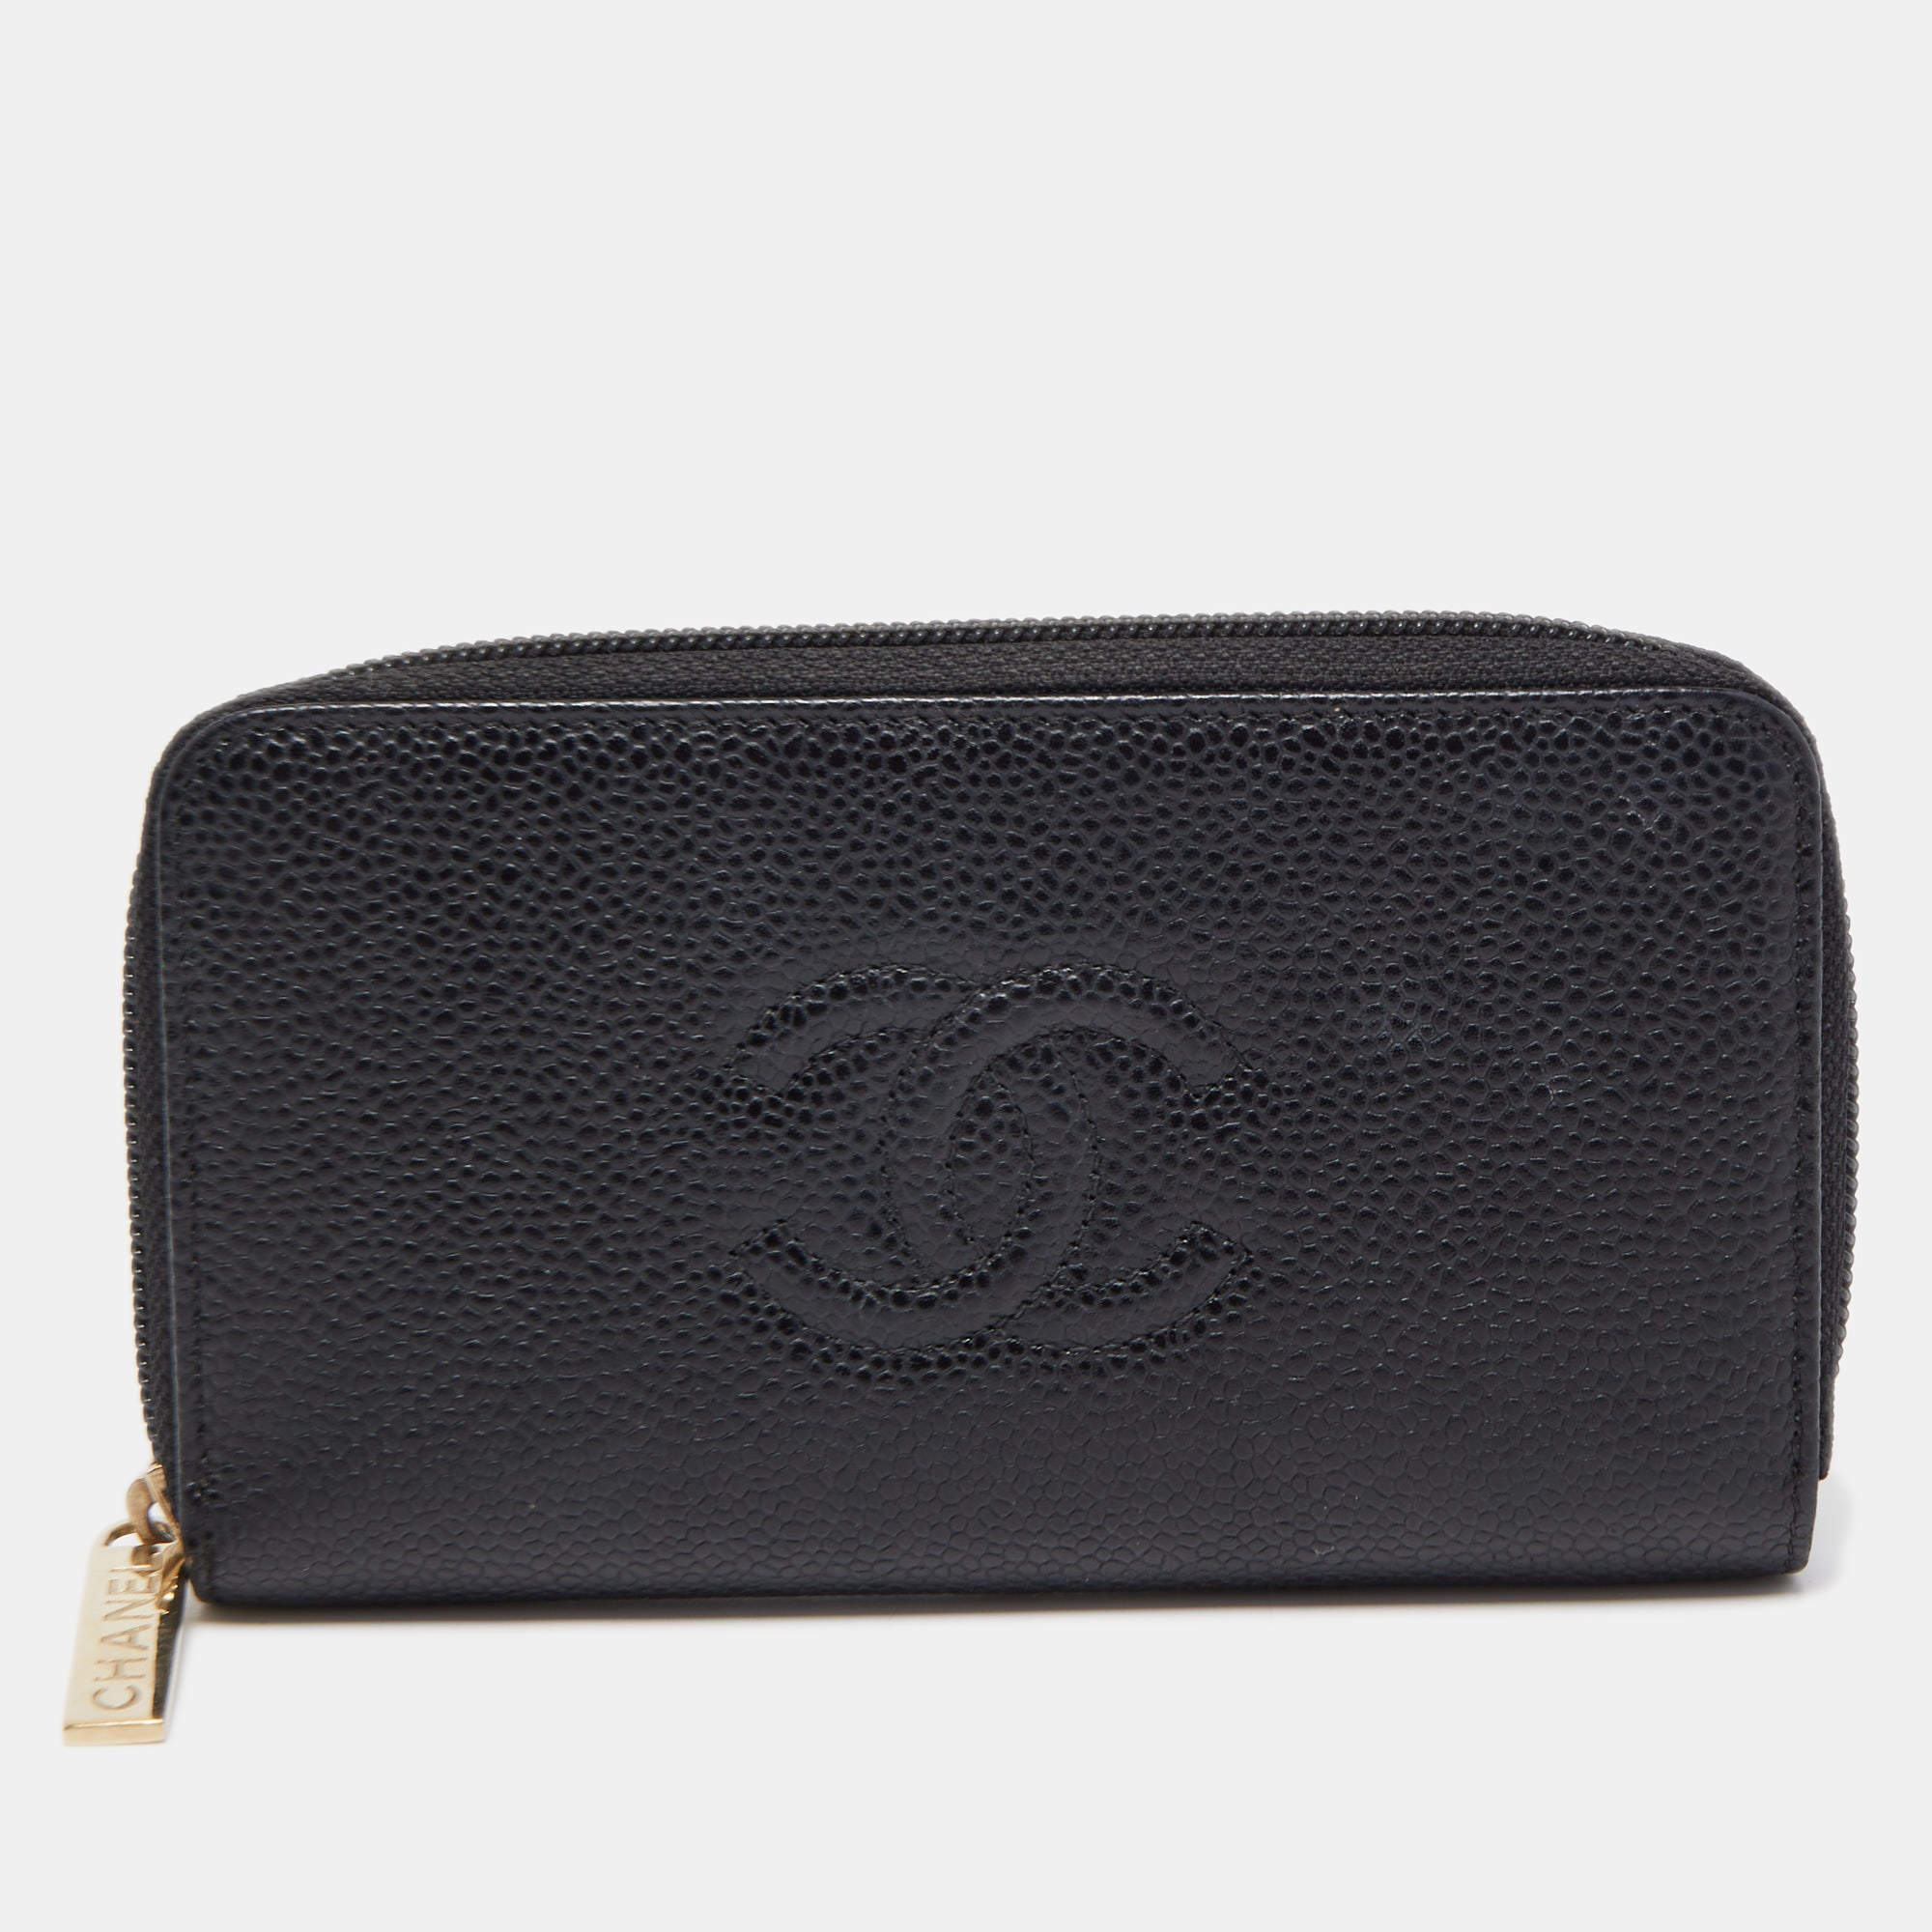 Chanel Black Caviar Quilted Leather CC Timeless Zip Wallet